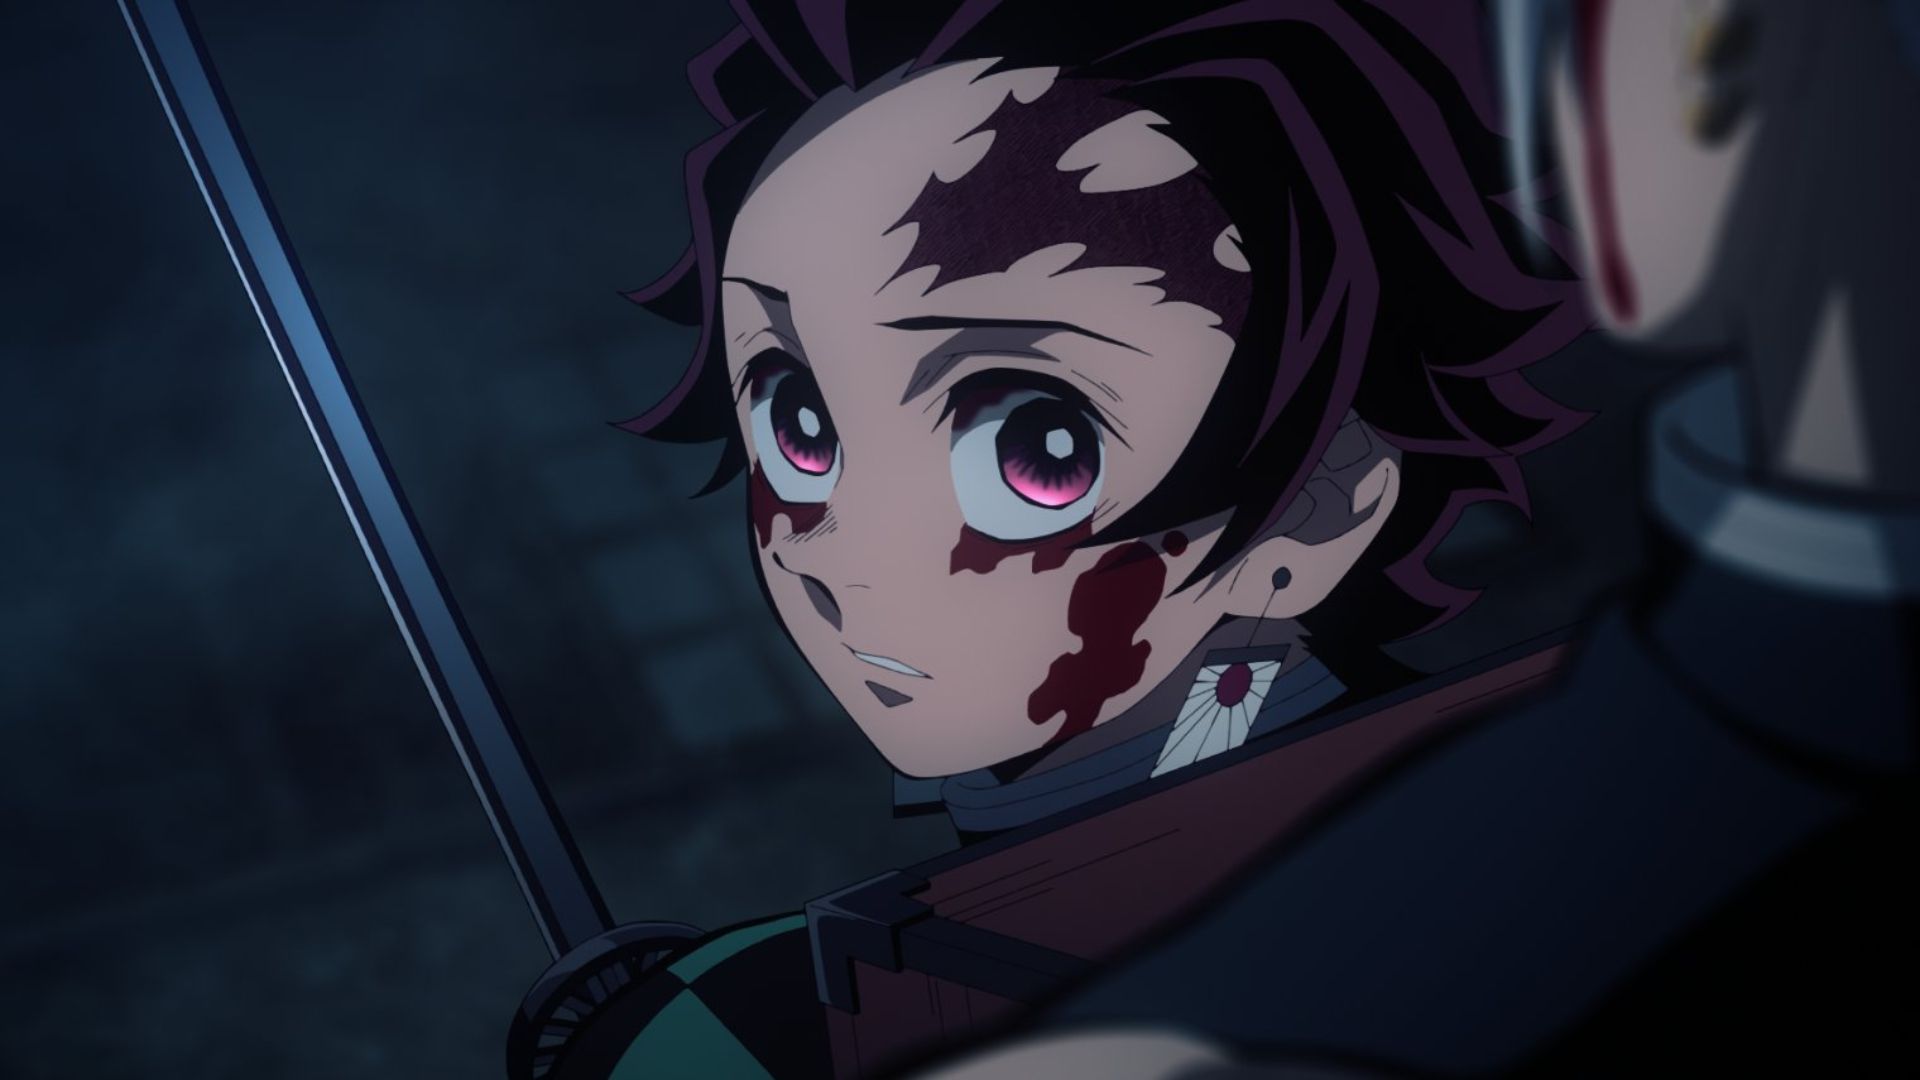 How to watch Demon Slayer in order (TV series and movie) | GamesRadar+